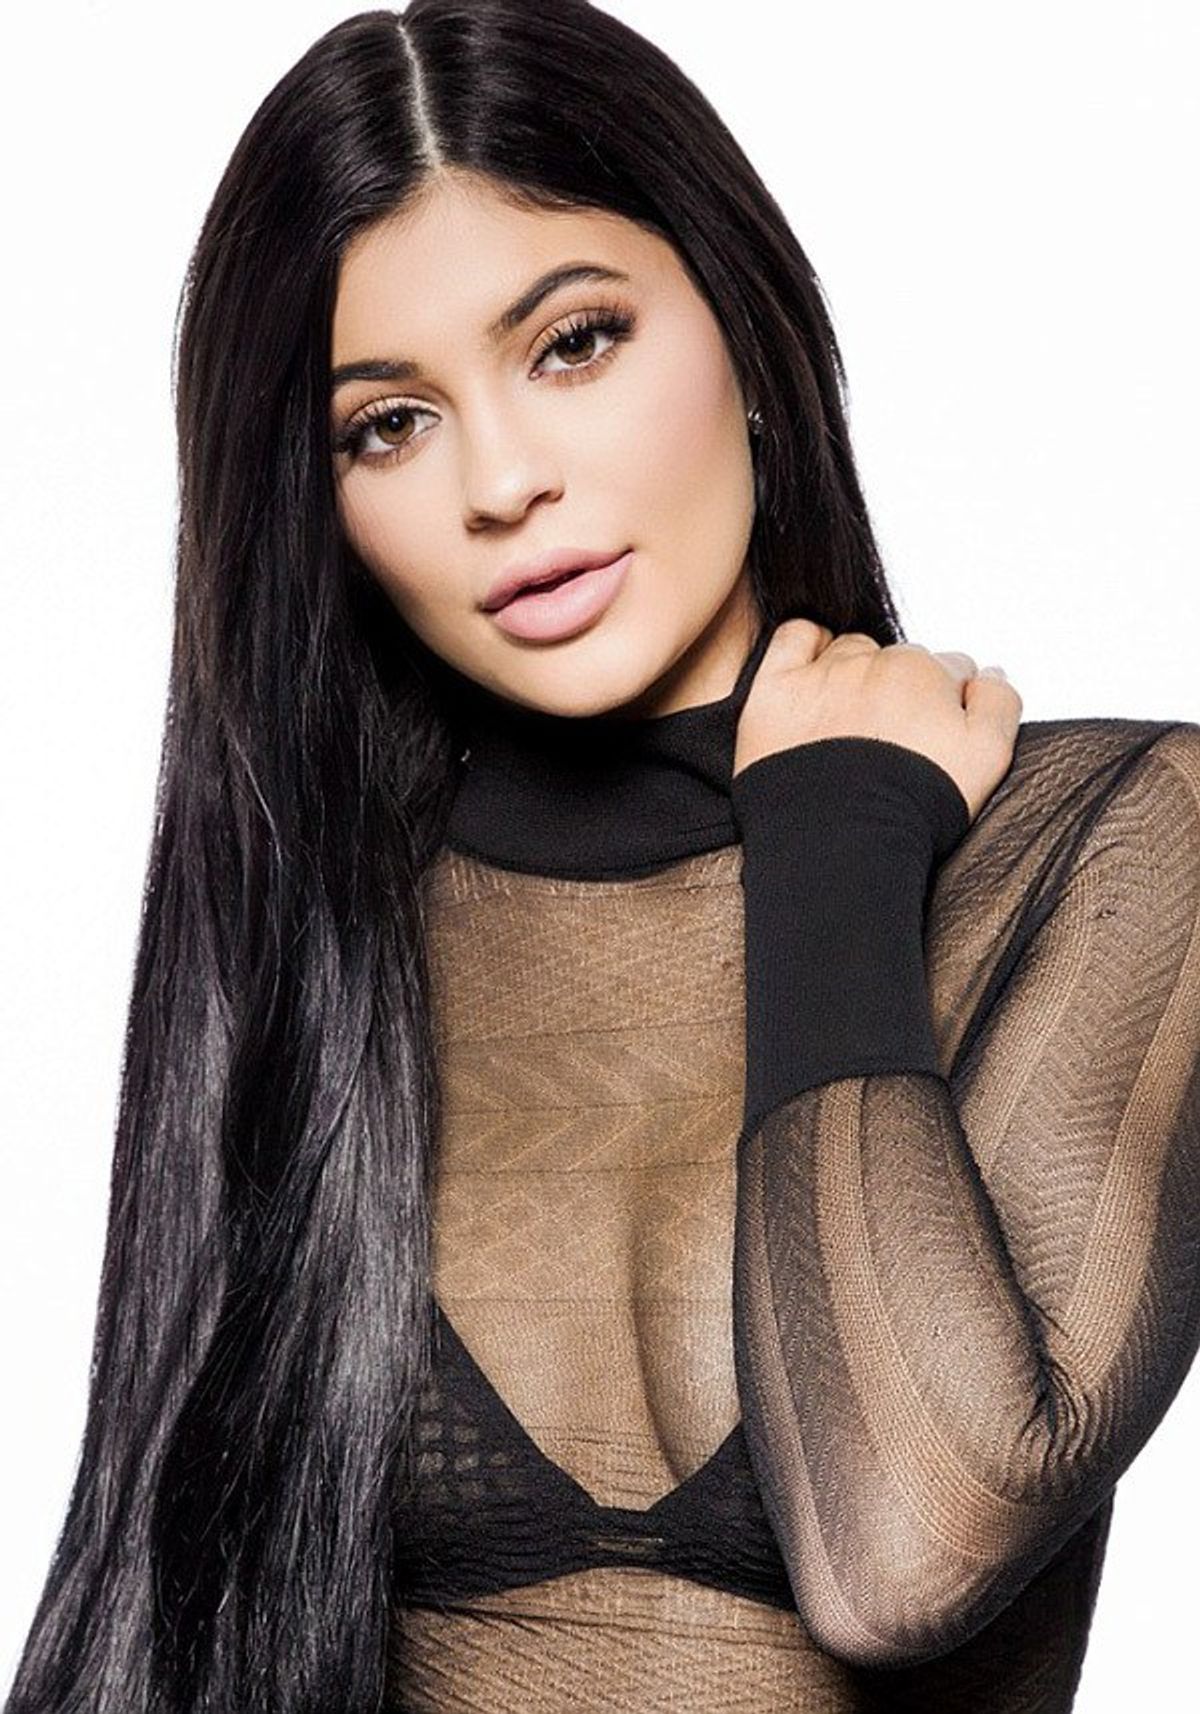 Kylie Jenner: The Plastic-Surgery-Gone-Wrong Face Of Our Generation